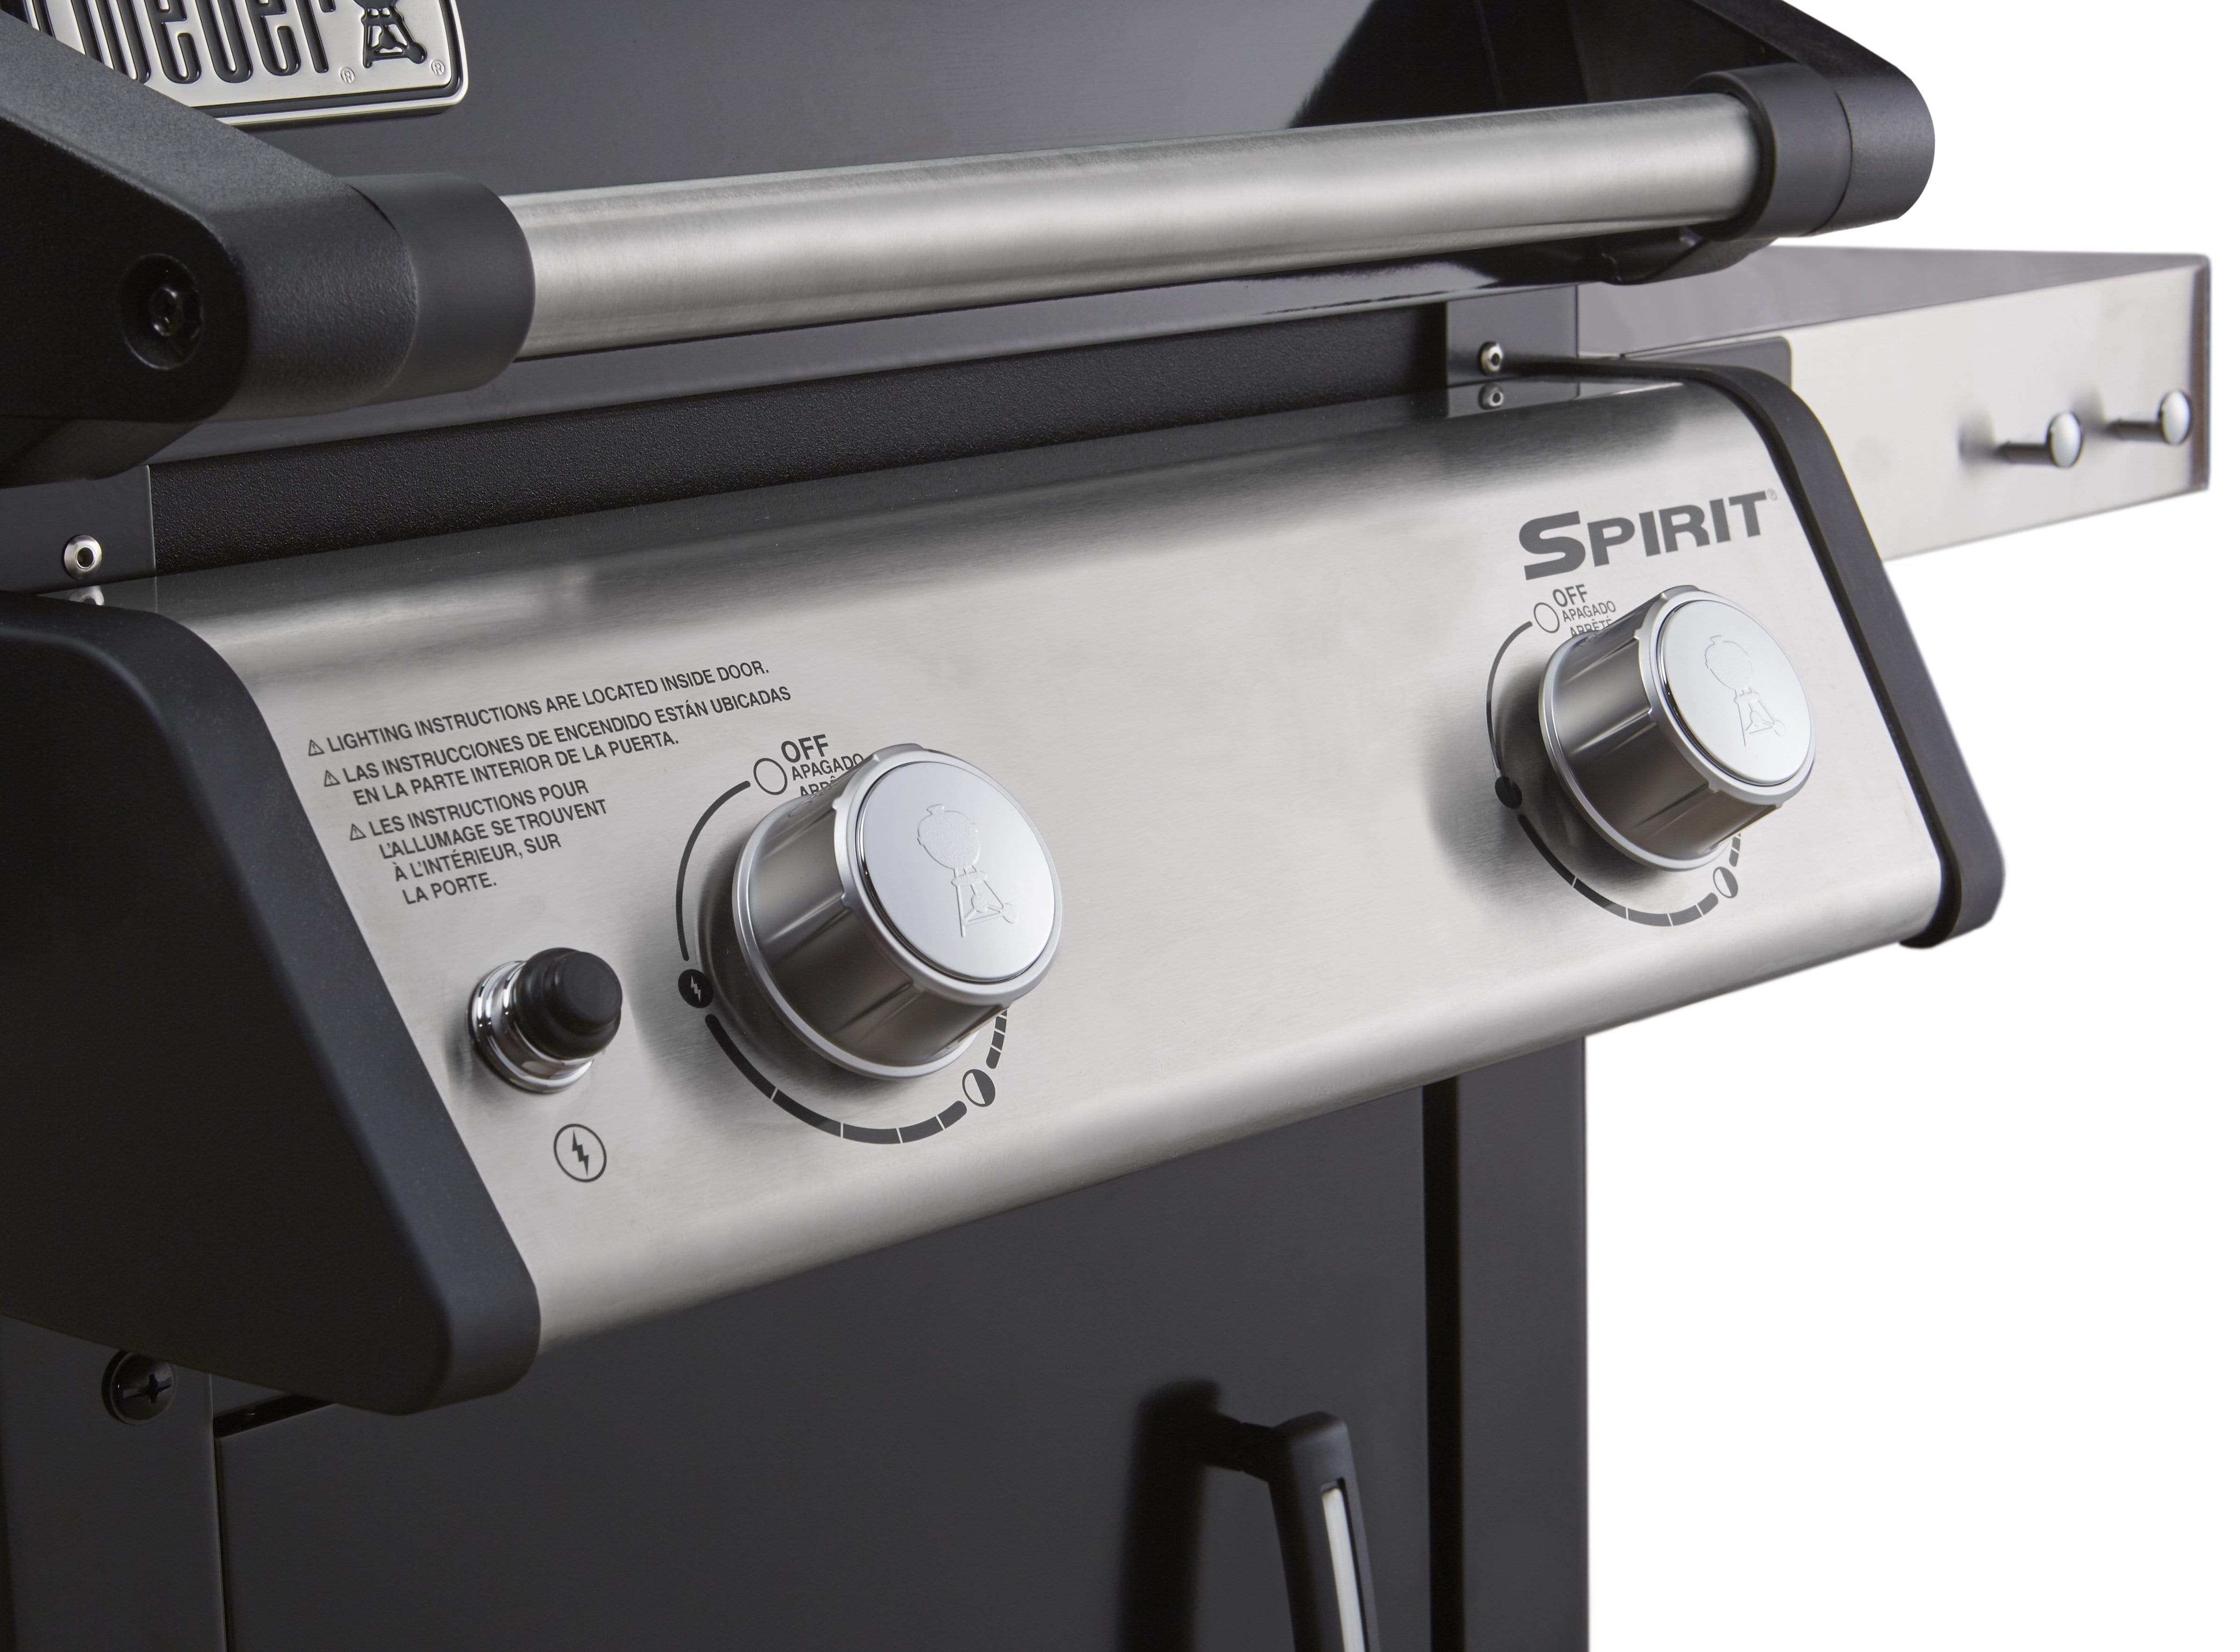 Weber Weber Spirit E-215 2-Burner BBQ in Black with Cast-Iron Cooking Grates Freestanding Gas Grill